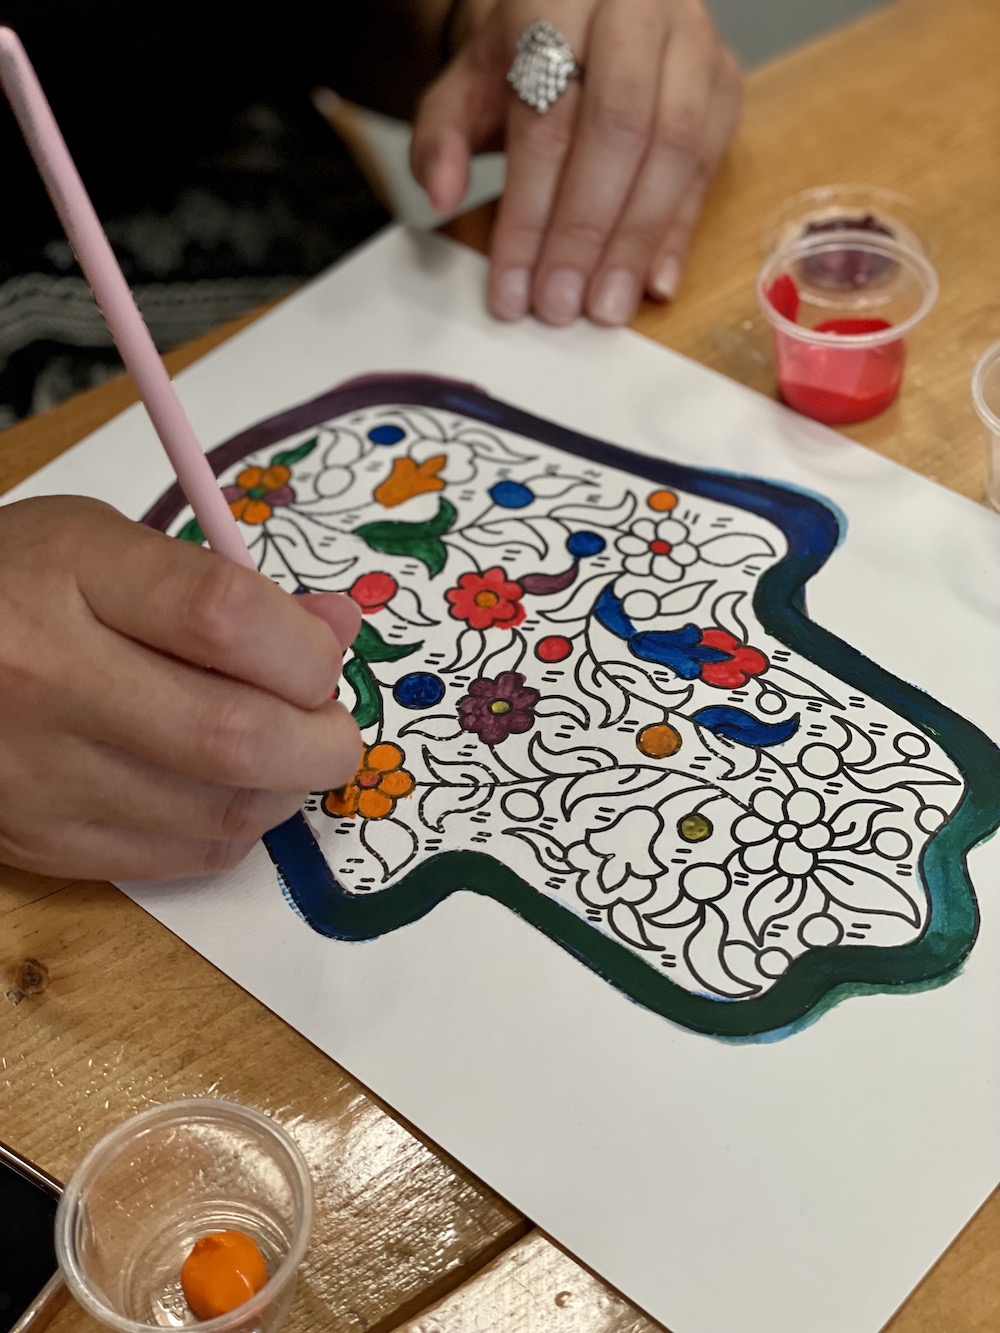 Painting Workshop inspired by Hebron Ceramic Patterns